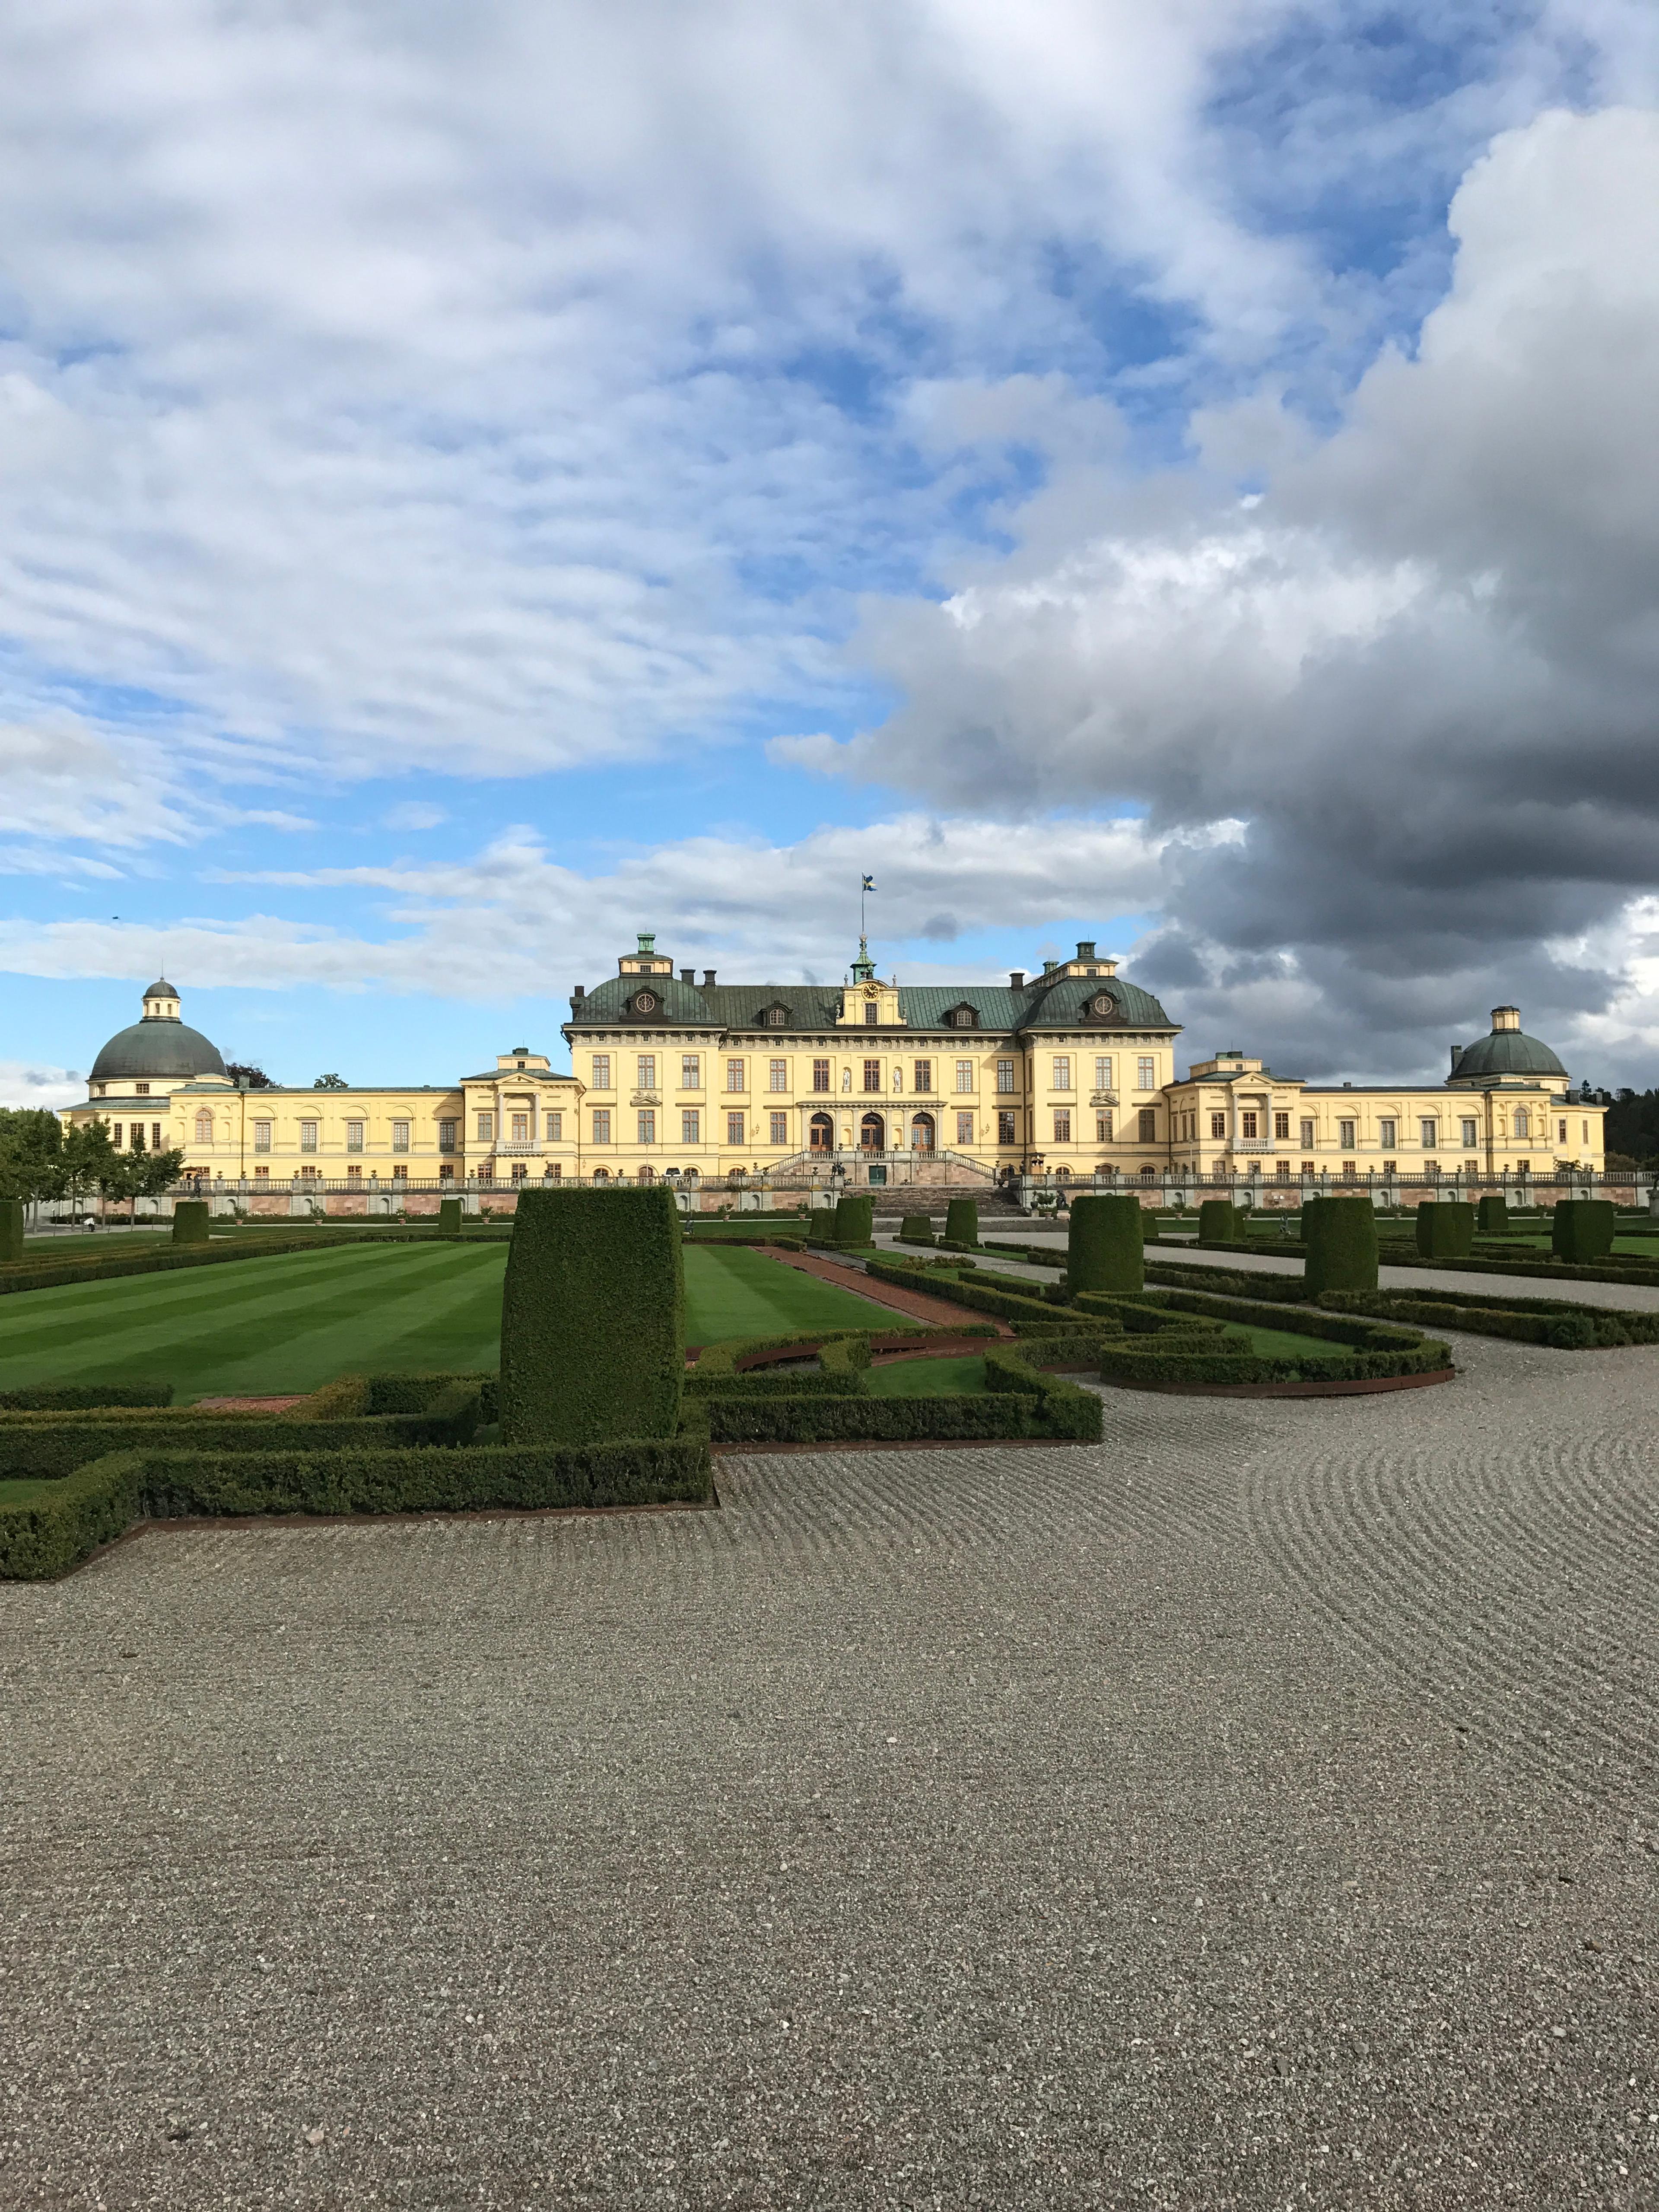 Cover image of this place Drottningholms Slott